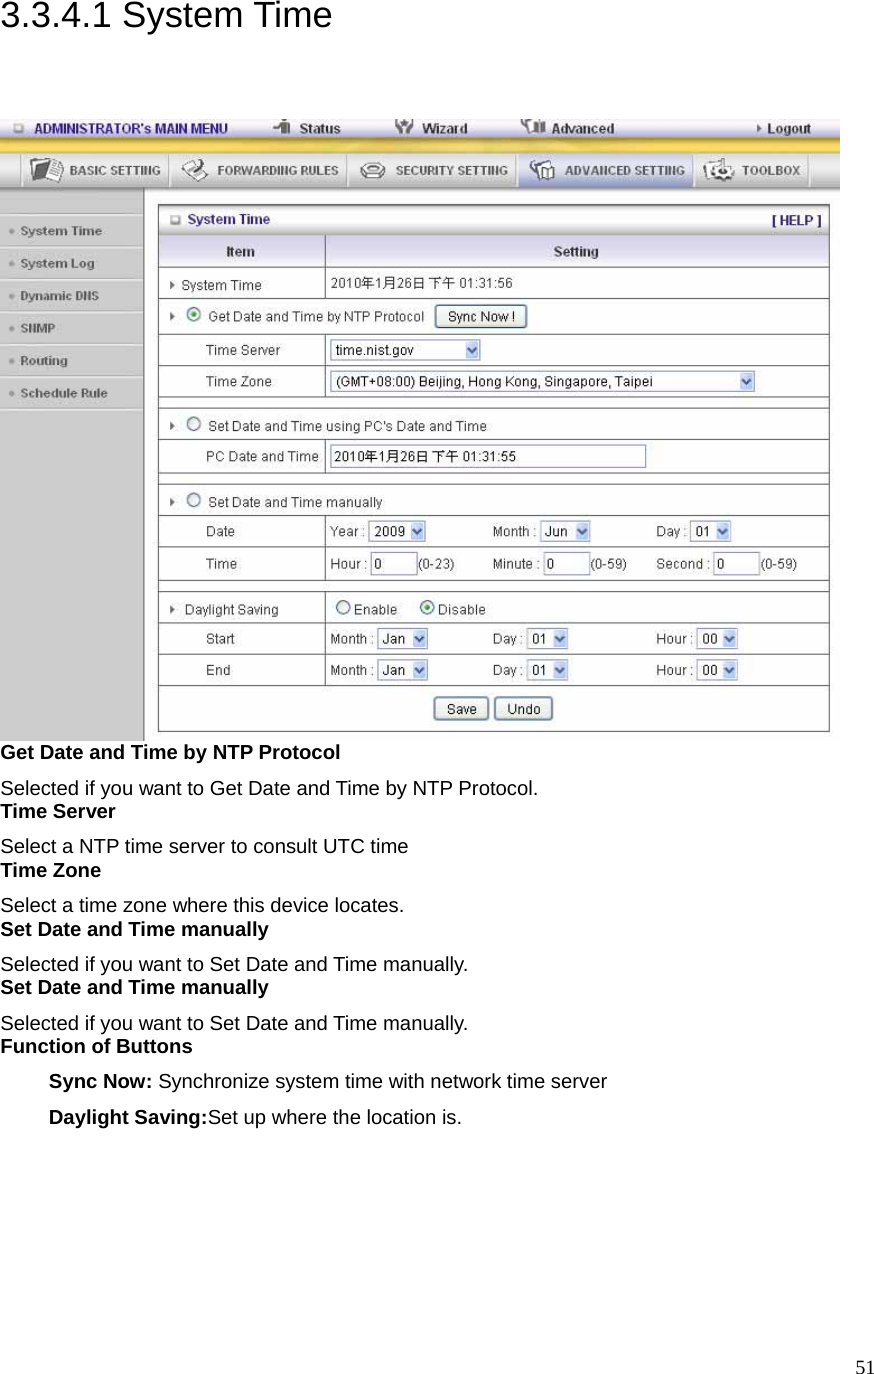  513.3.4.1 System Time  Get Date and Time by NTP Protocol Selected if you want to Get Date and Time by NTP Protocol.   Time Server Select a NTP time server to consult UTC time   Time Zone Select a time zone where this device locates.   Set Date and Time manually Selected if you want to Set Date and Time manually.   Set Date and Time manually Selected if you want to Set Date and Time manually. Function of Buttons Sync Now: Synchronize system time with network time server Daylight Saving:Set up where the location is. 